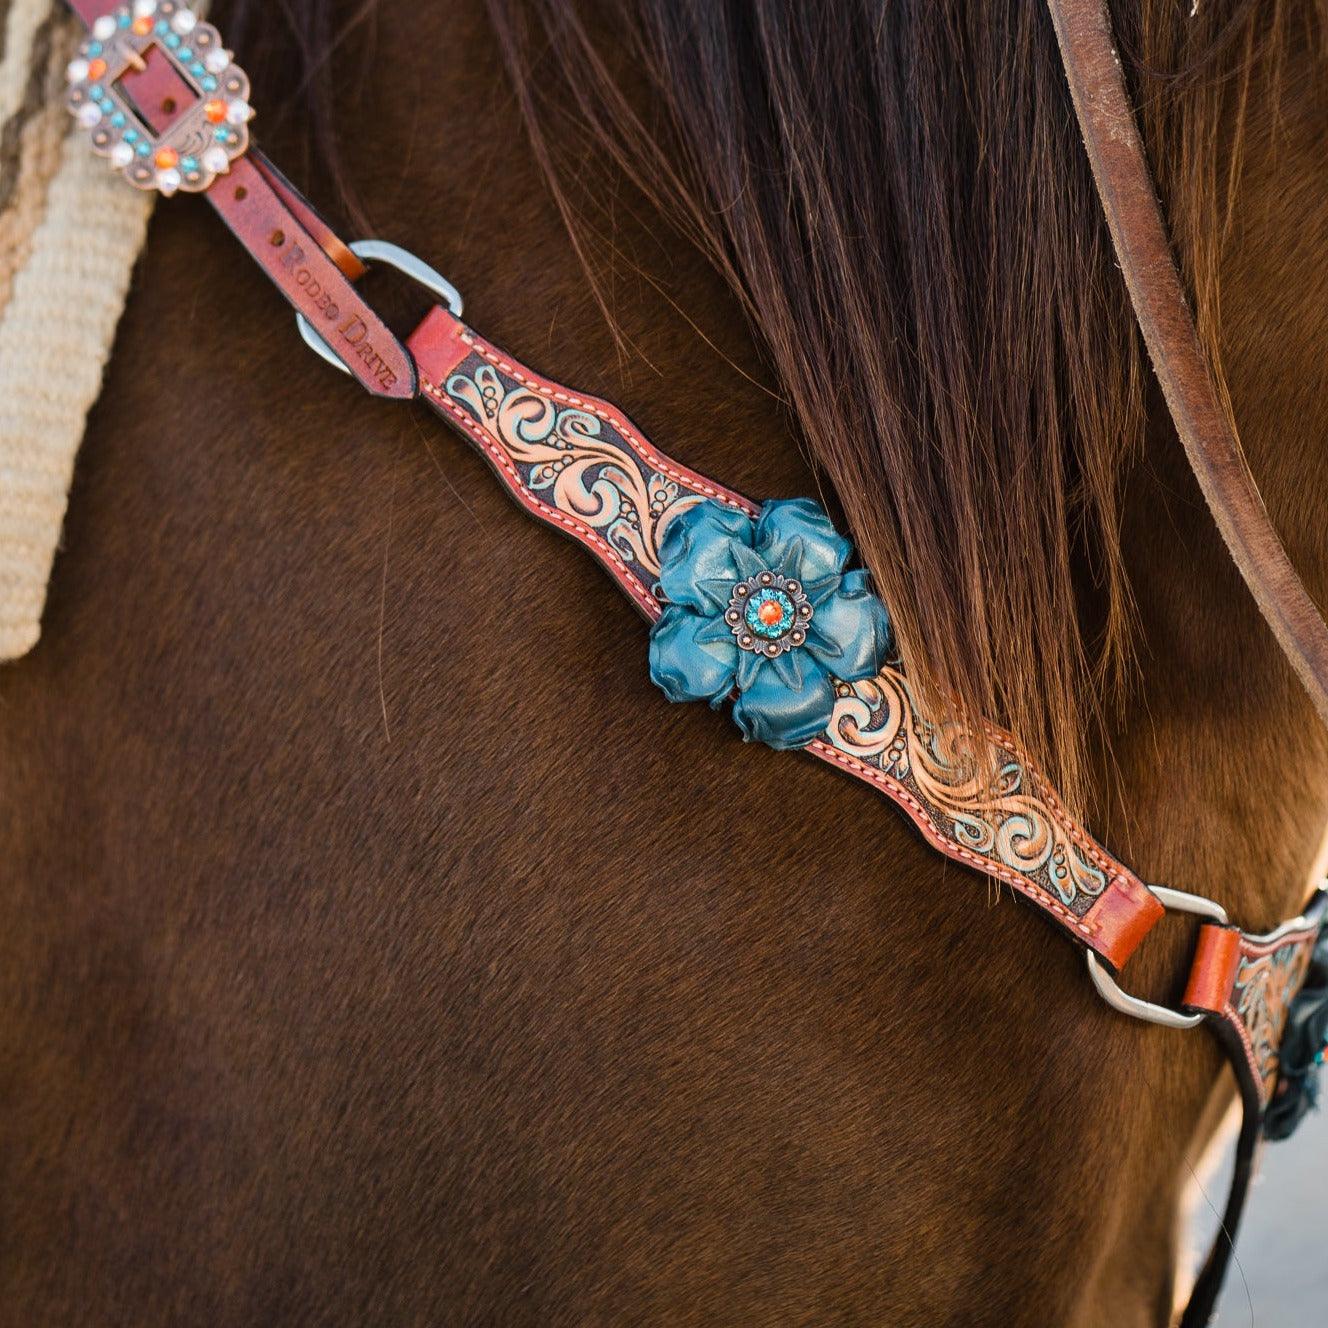 Rust Triangle Turquoise Flower One Ear/ Breastcollar #OEBC533 - RODEO DRIVE